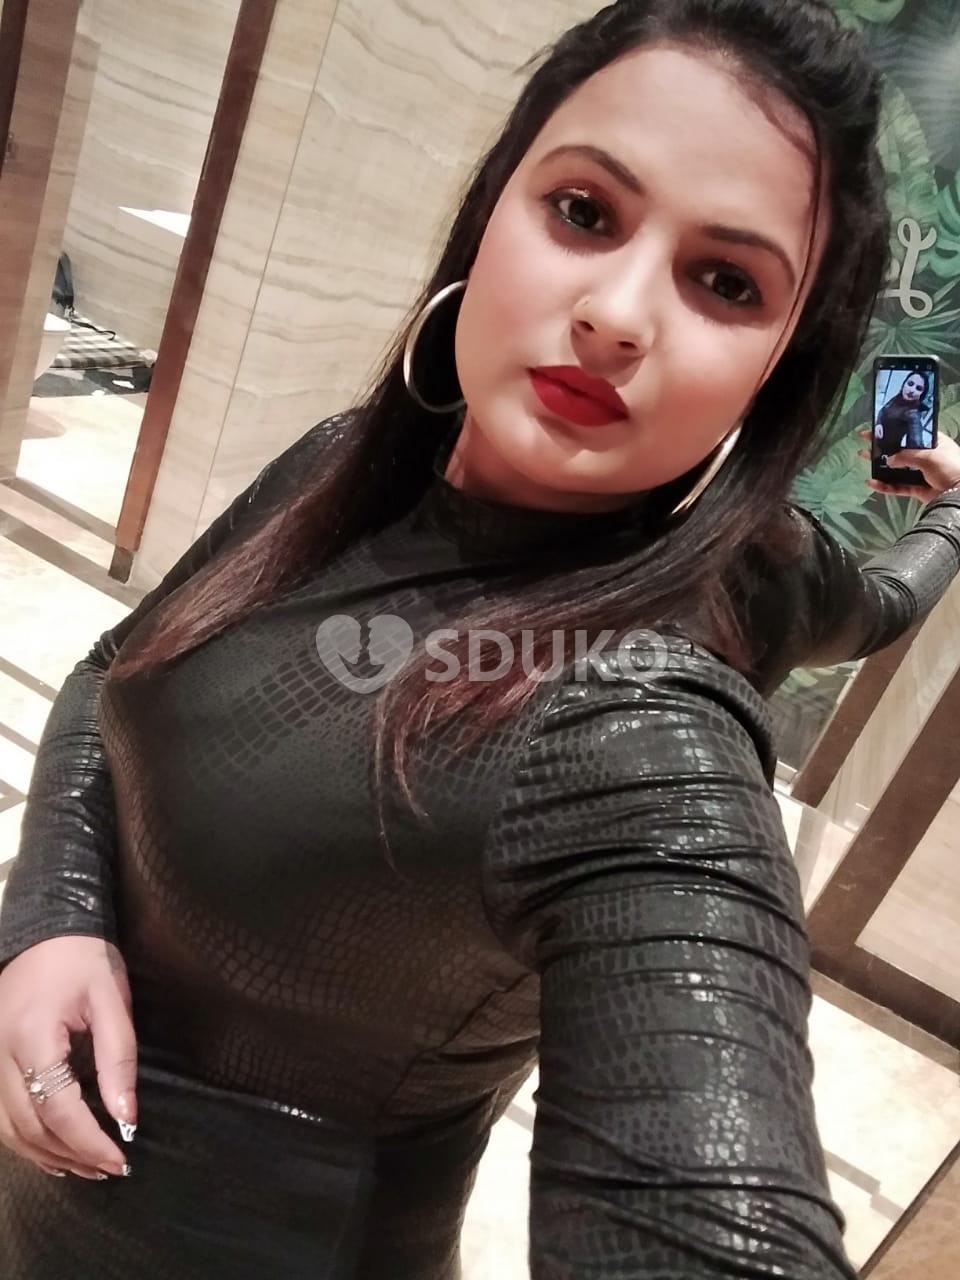 Dharmatala 🥰✅❣️.. 100% SAFE AND SECURE TODAY LOW PRICE UNLIMITED ENJOY HOT COLLEGE GIRL HOUSEWIFE AUNTIES AVAIL